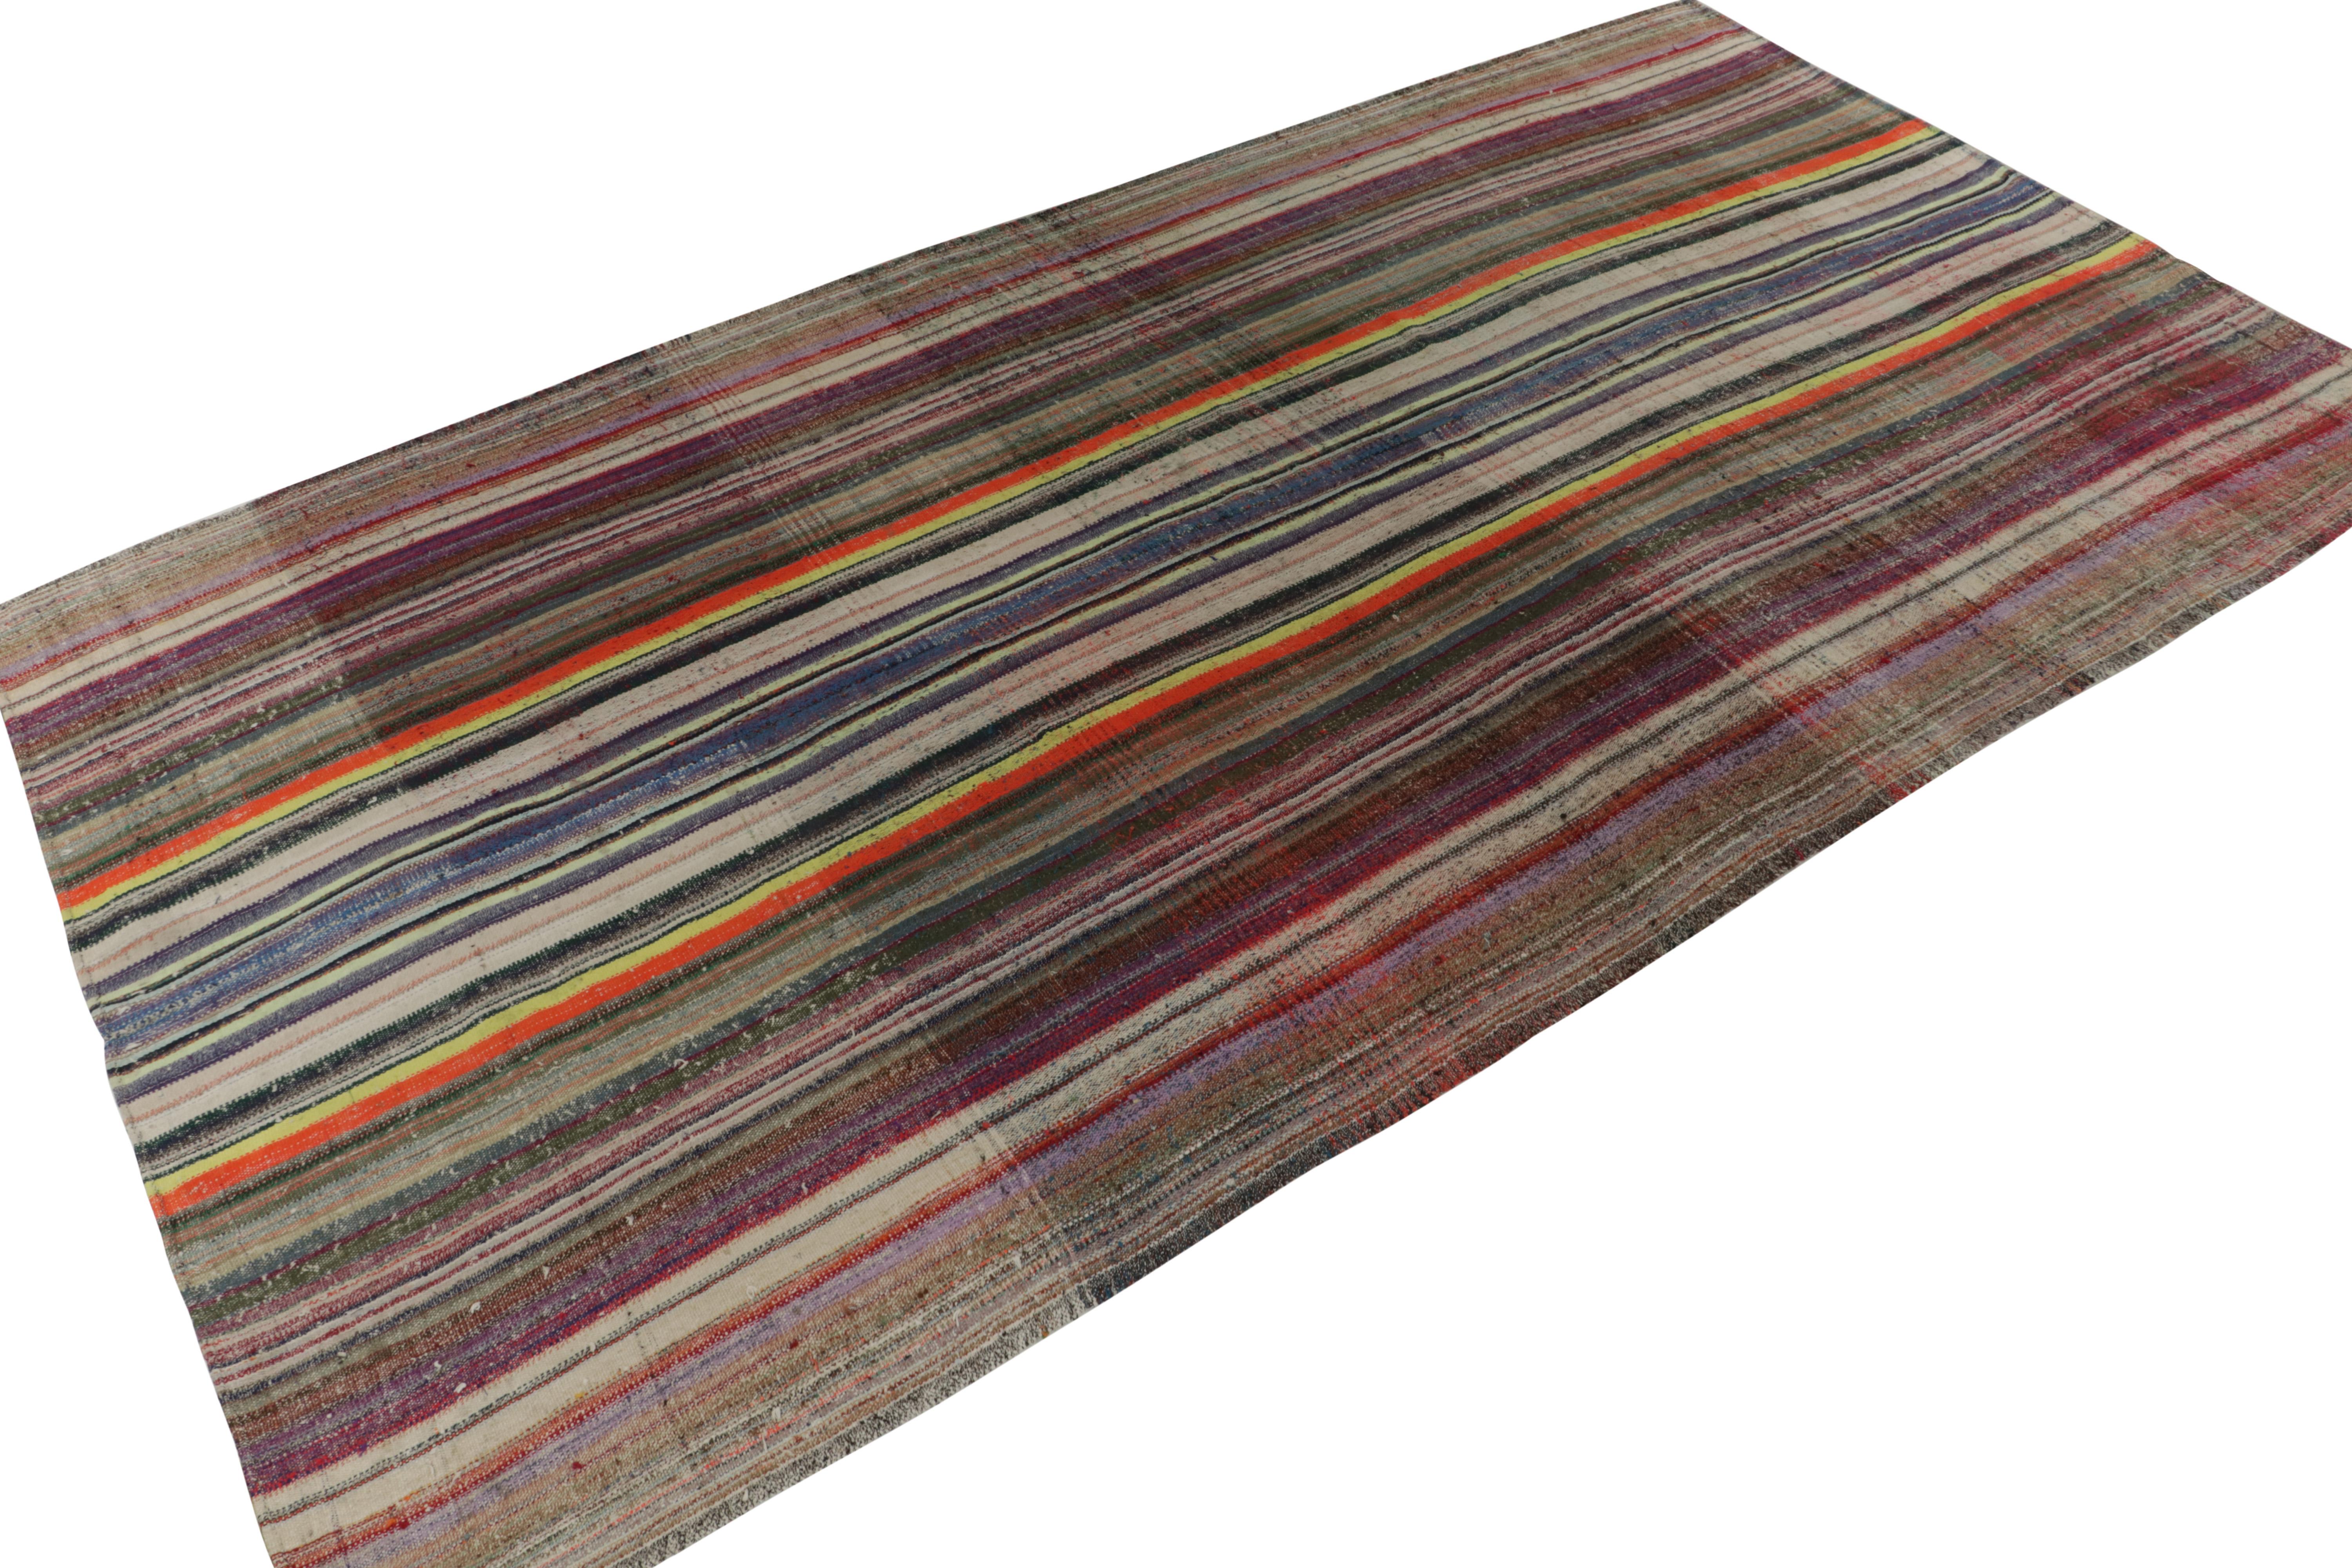 Handwoven in wool, a vintage Turkish kilim rug, connoting a rare variant of mid-century panel weaving styles circa 1950-1960. The sheer rarity of this large 10x15 size and the colorful polychromatic stripes is both extremely collectible and